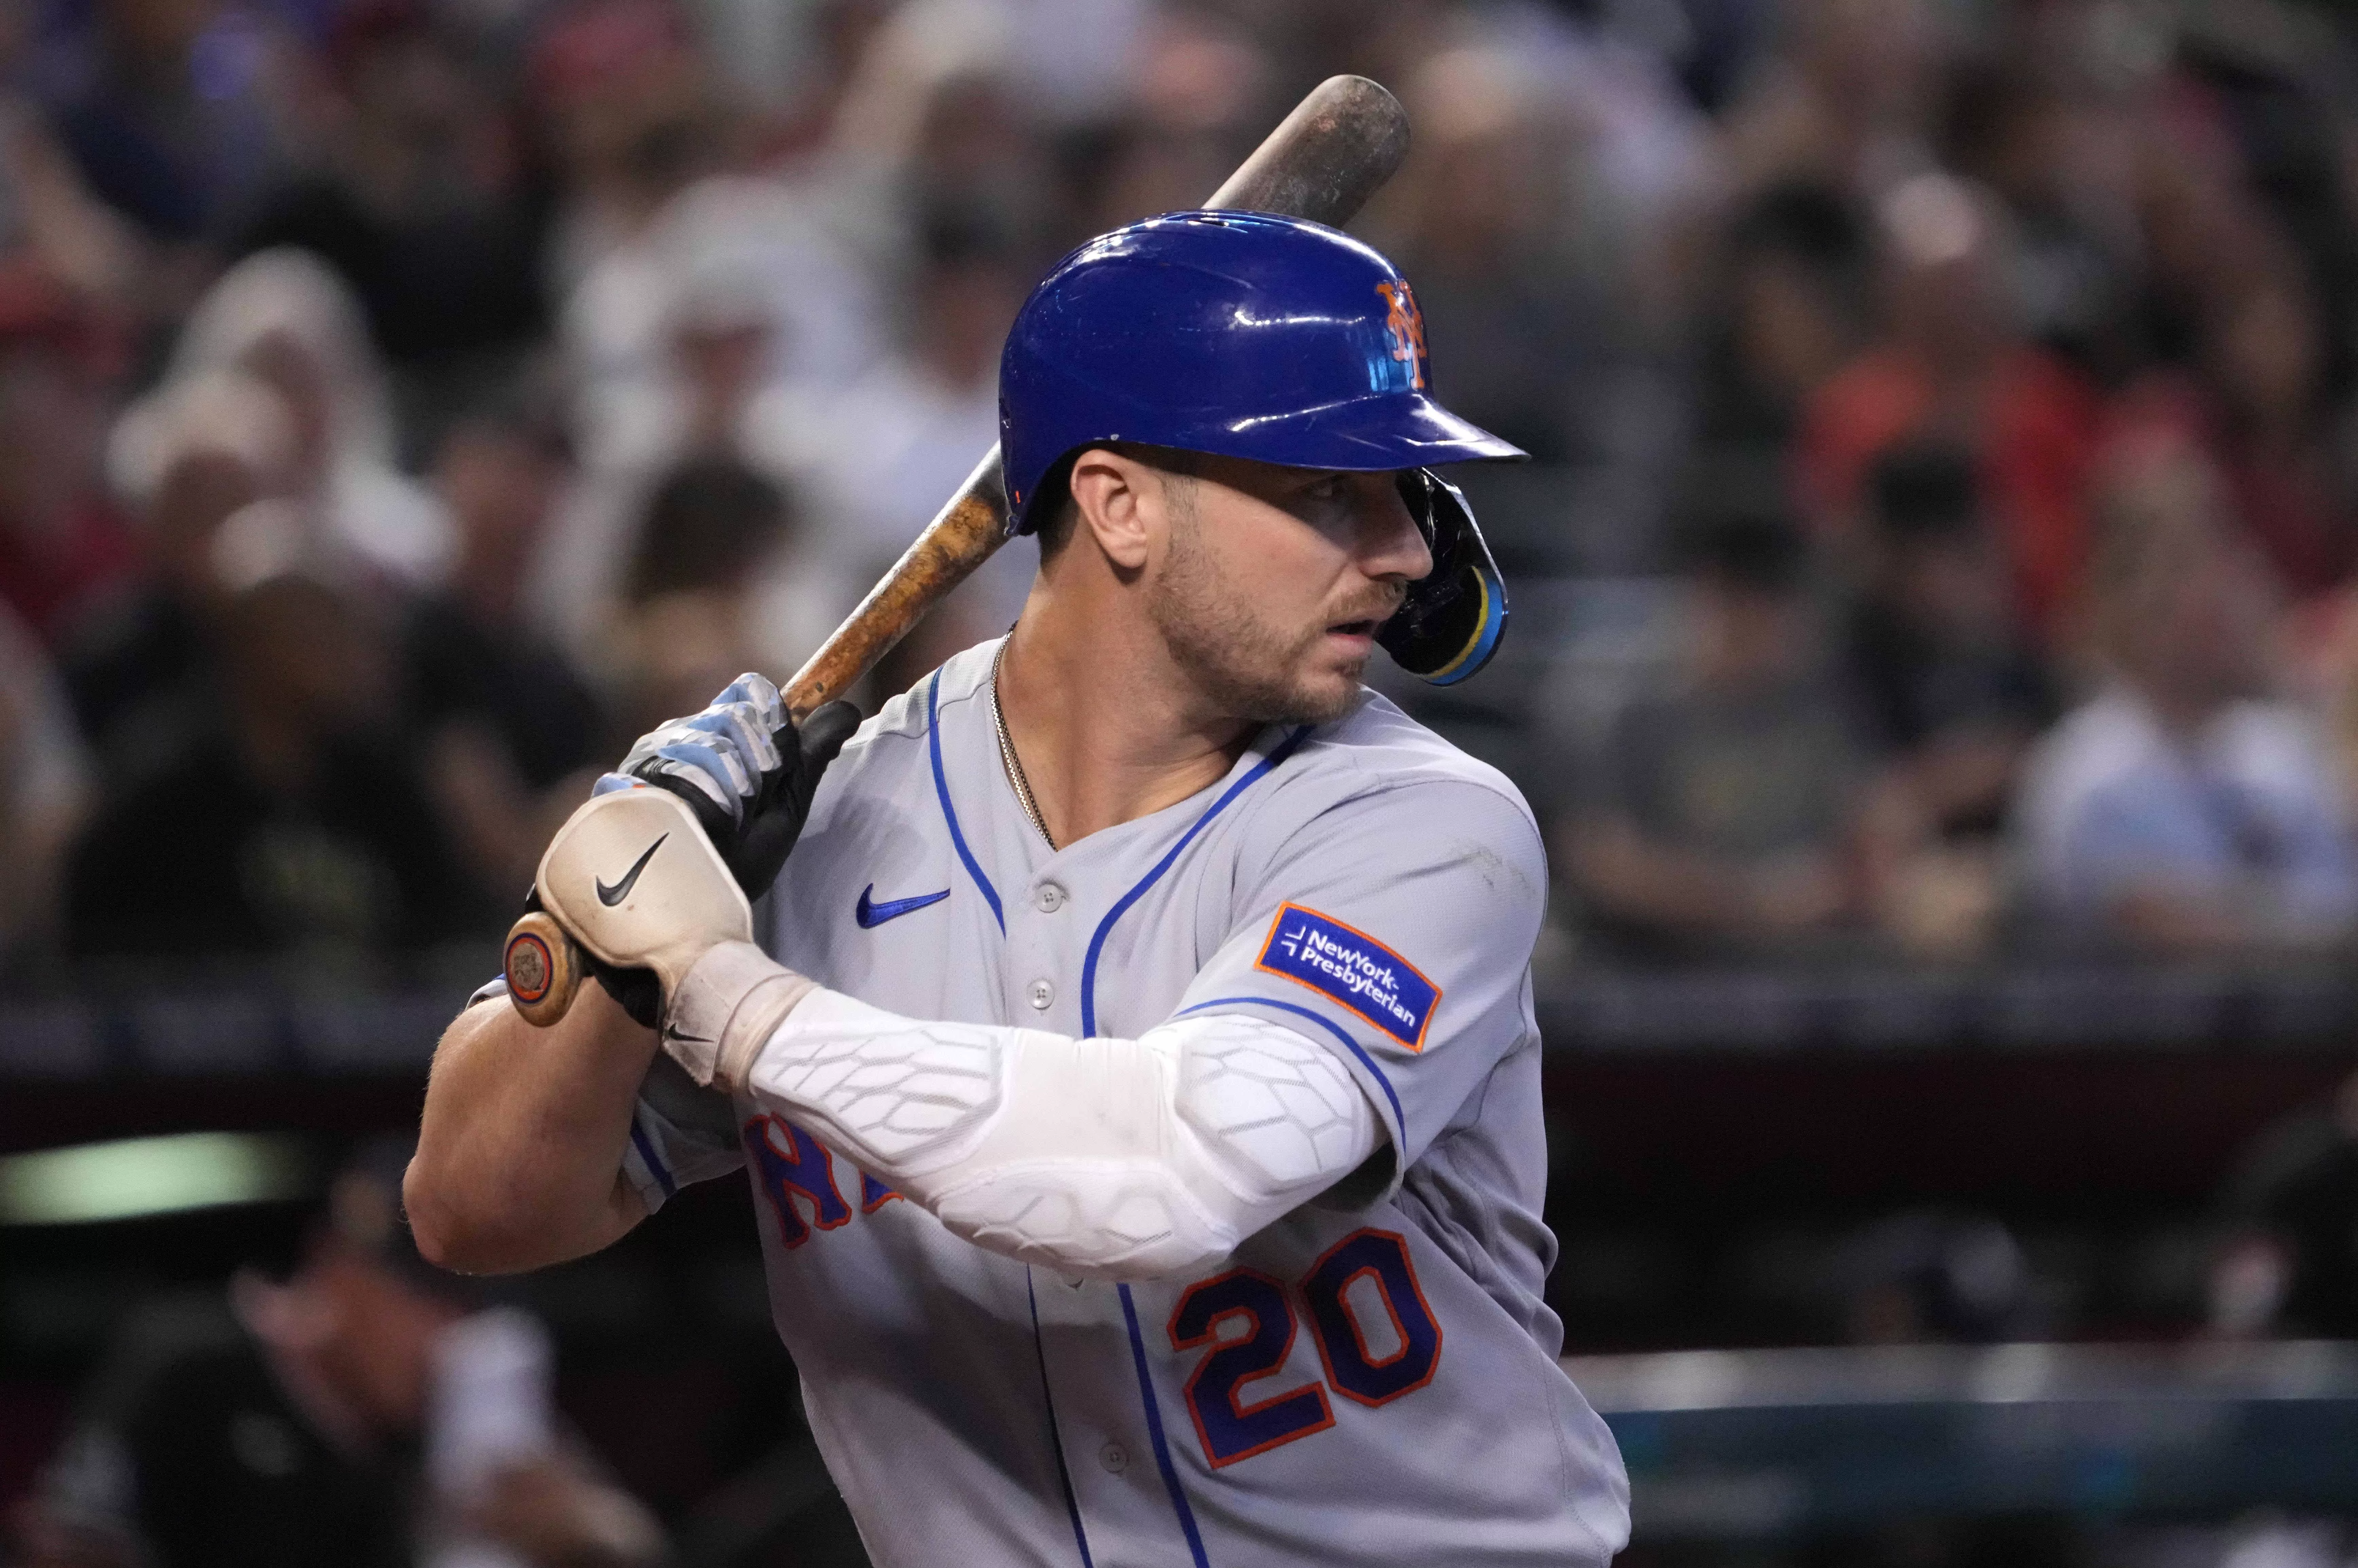 Amid Mets' repositioning, where does Pete Alonso fit in? - The Athletic